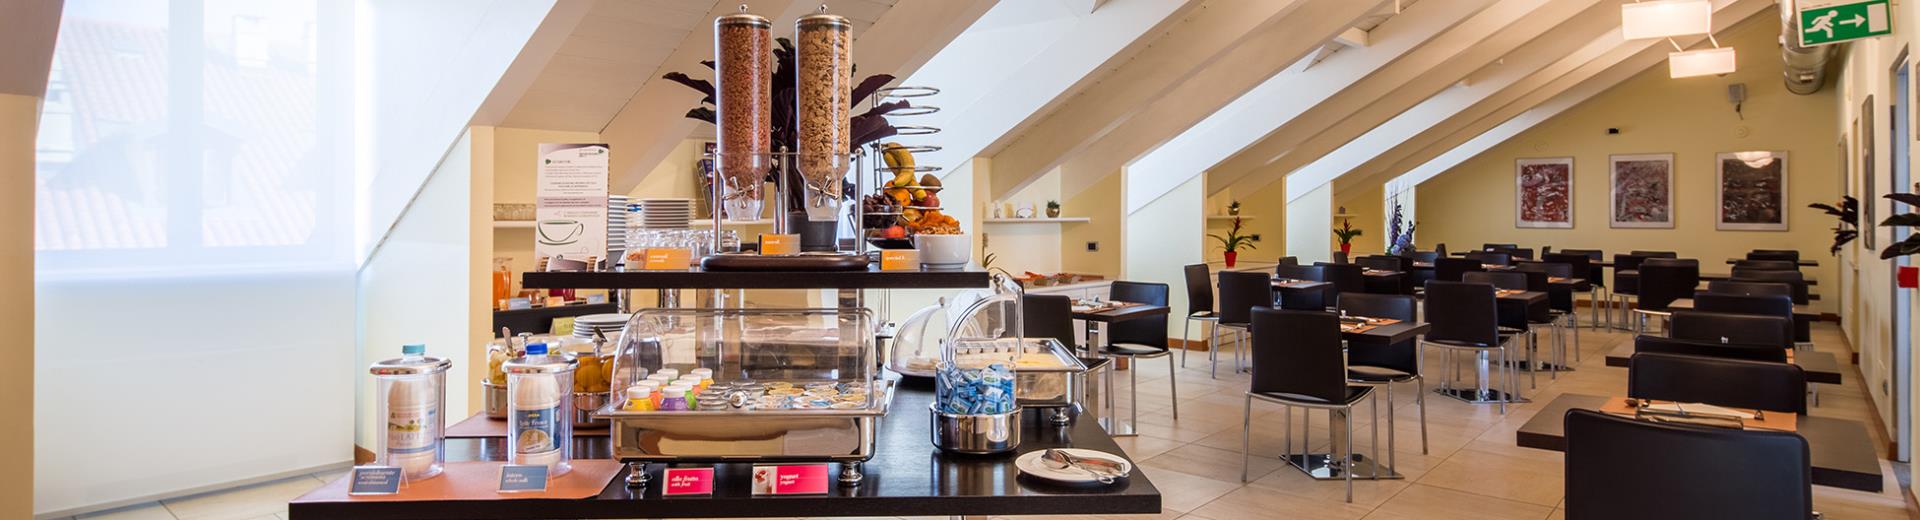 Healthy breakfast buffet with sweet and savory products for your stay in Turin.